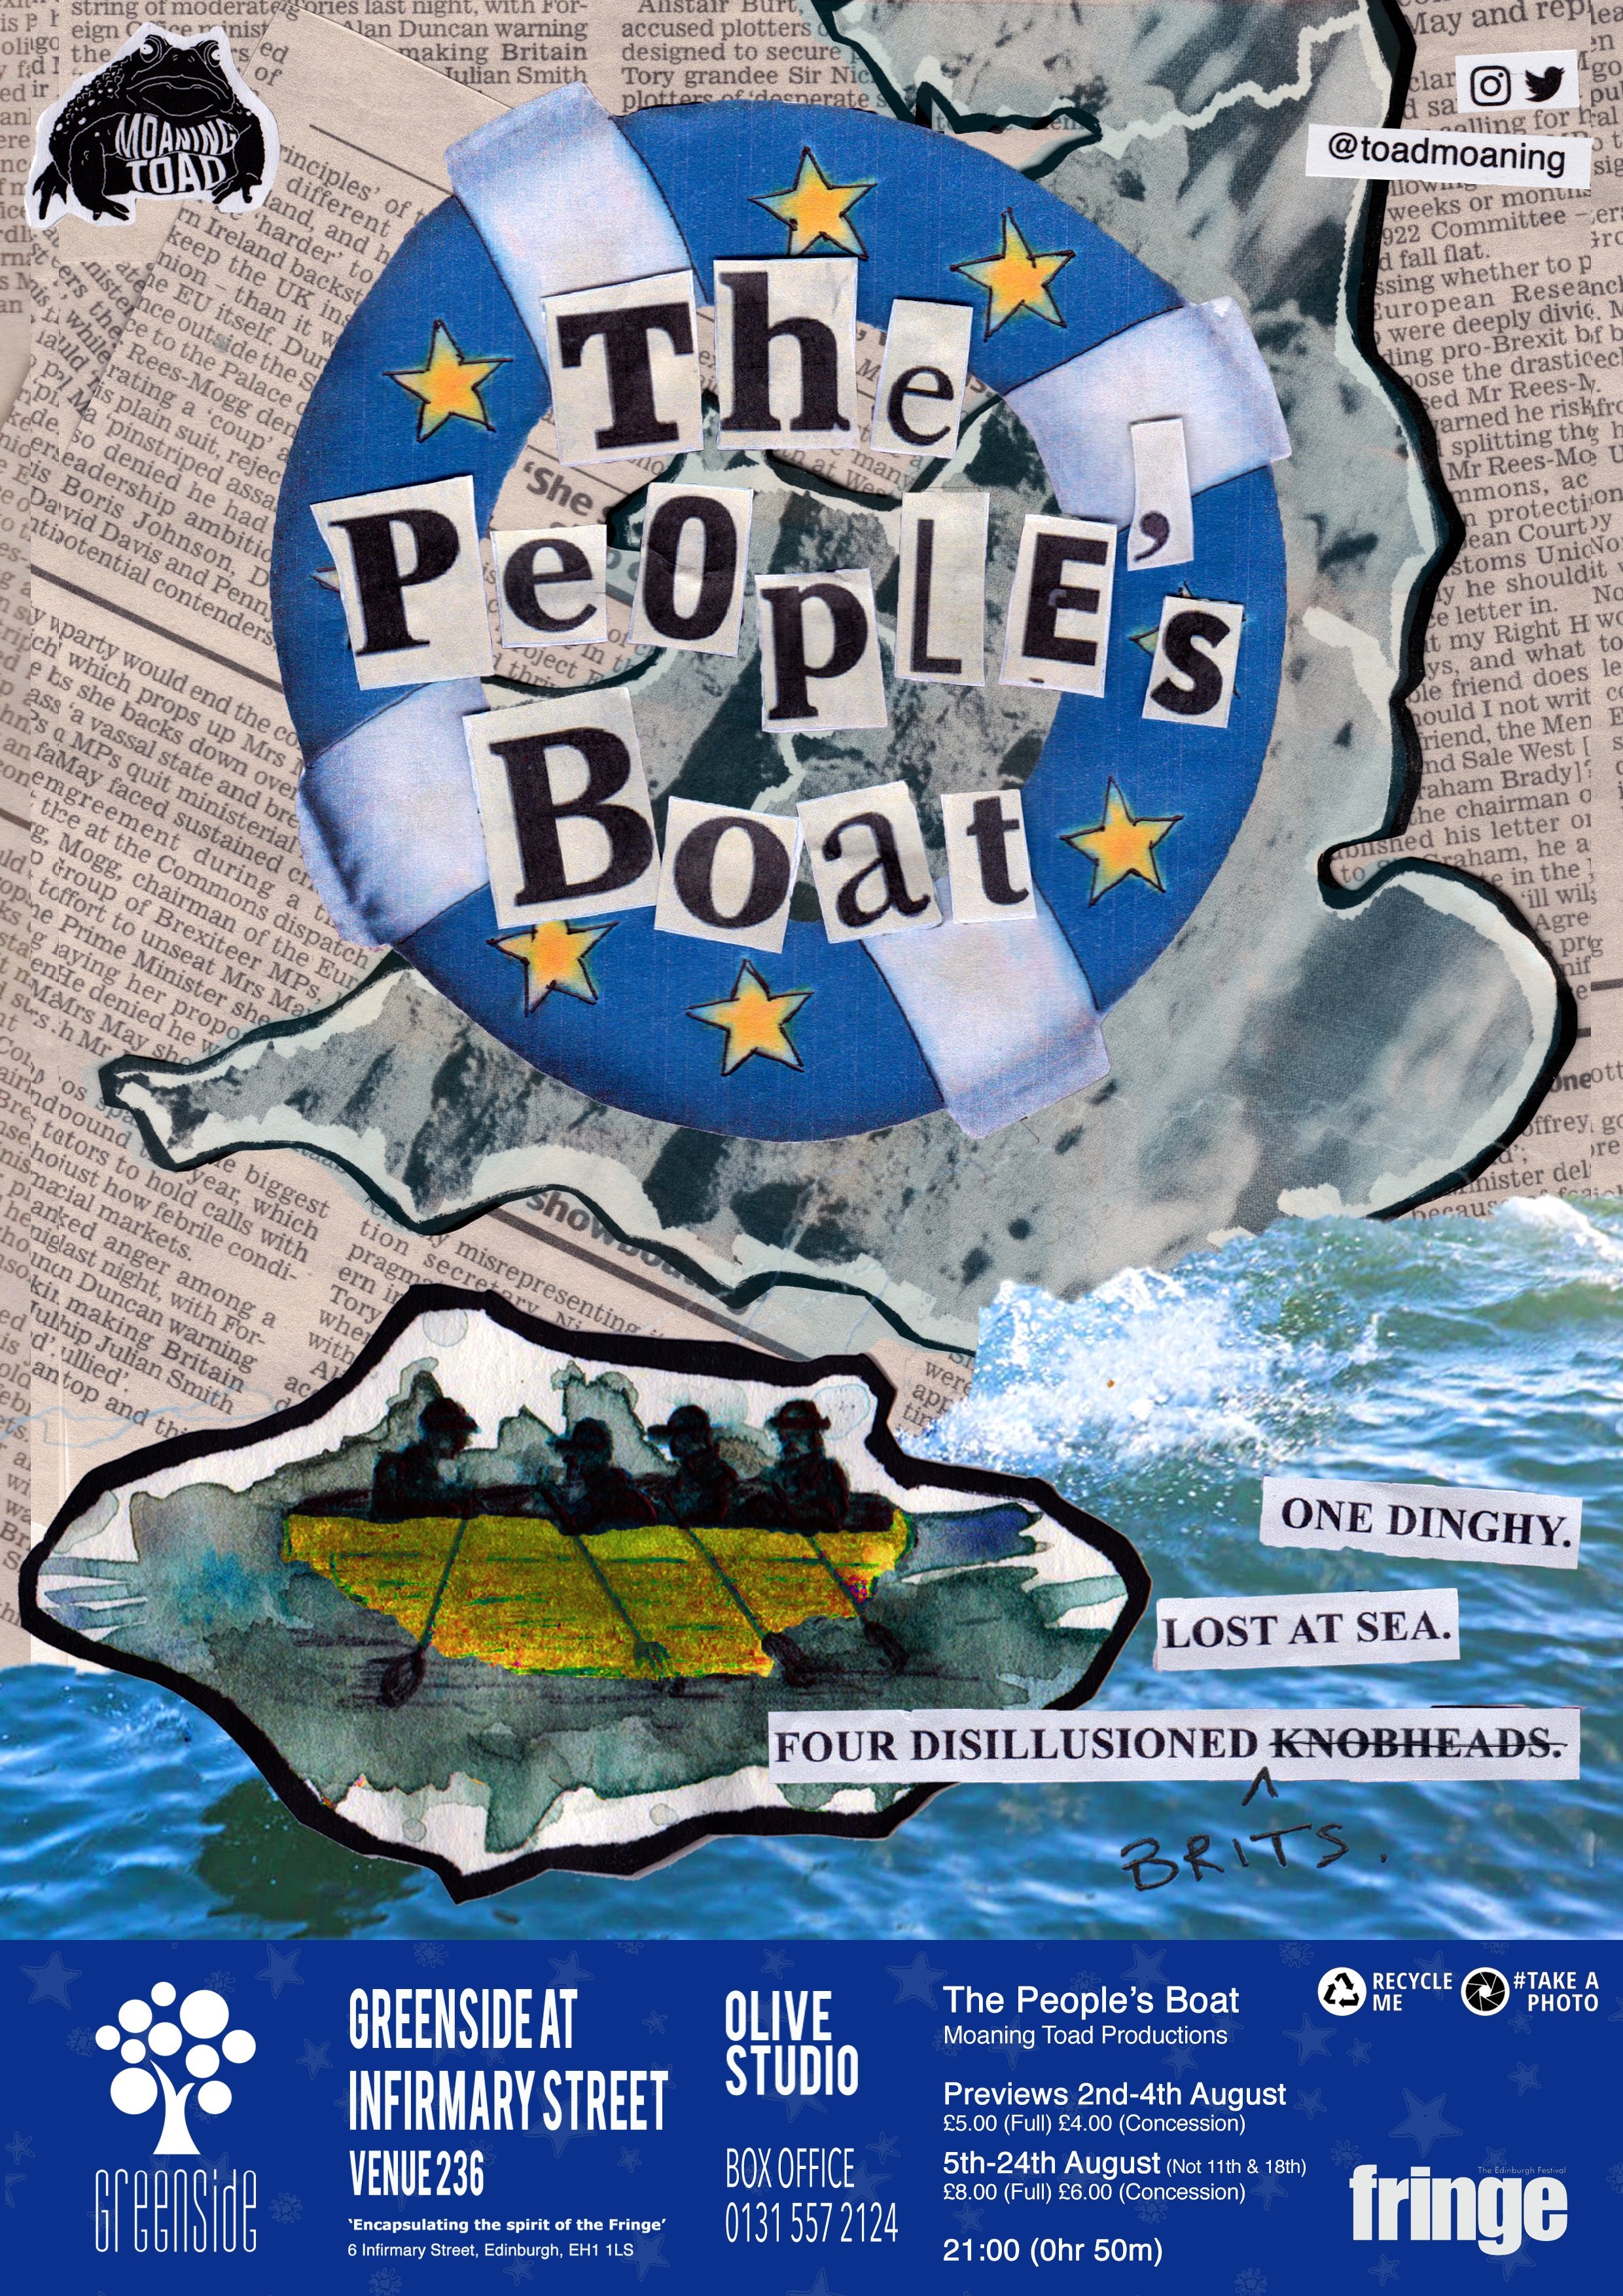 The poster for The People's Boat